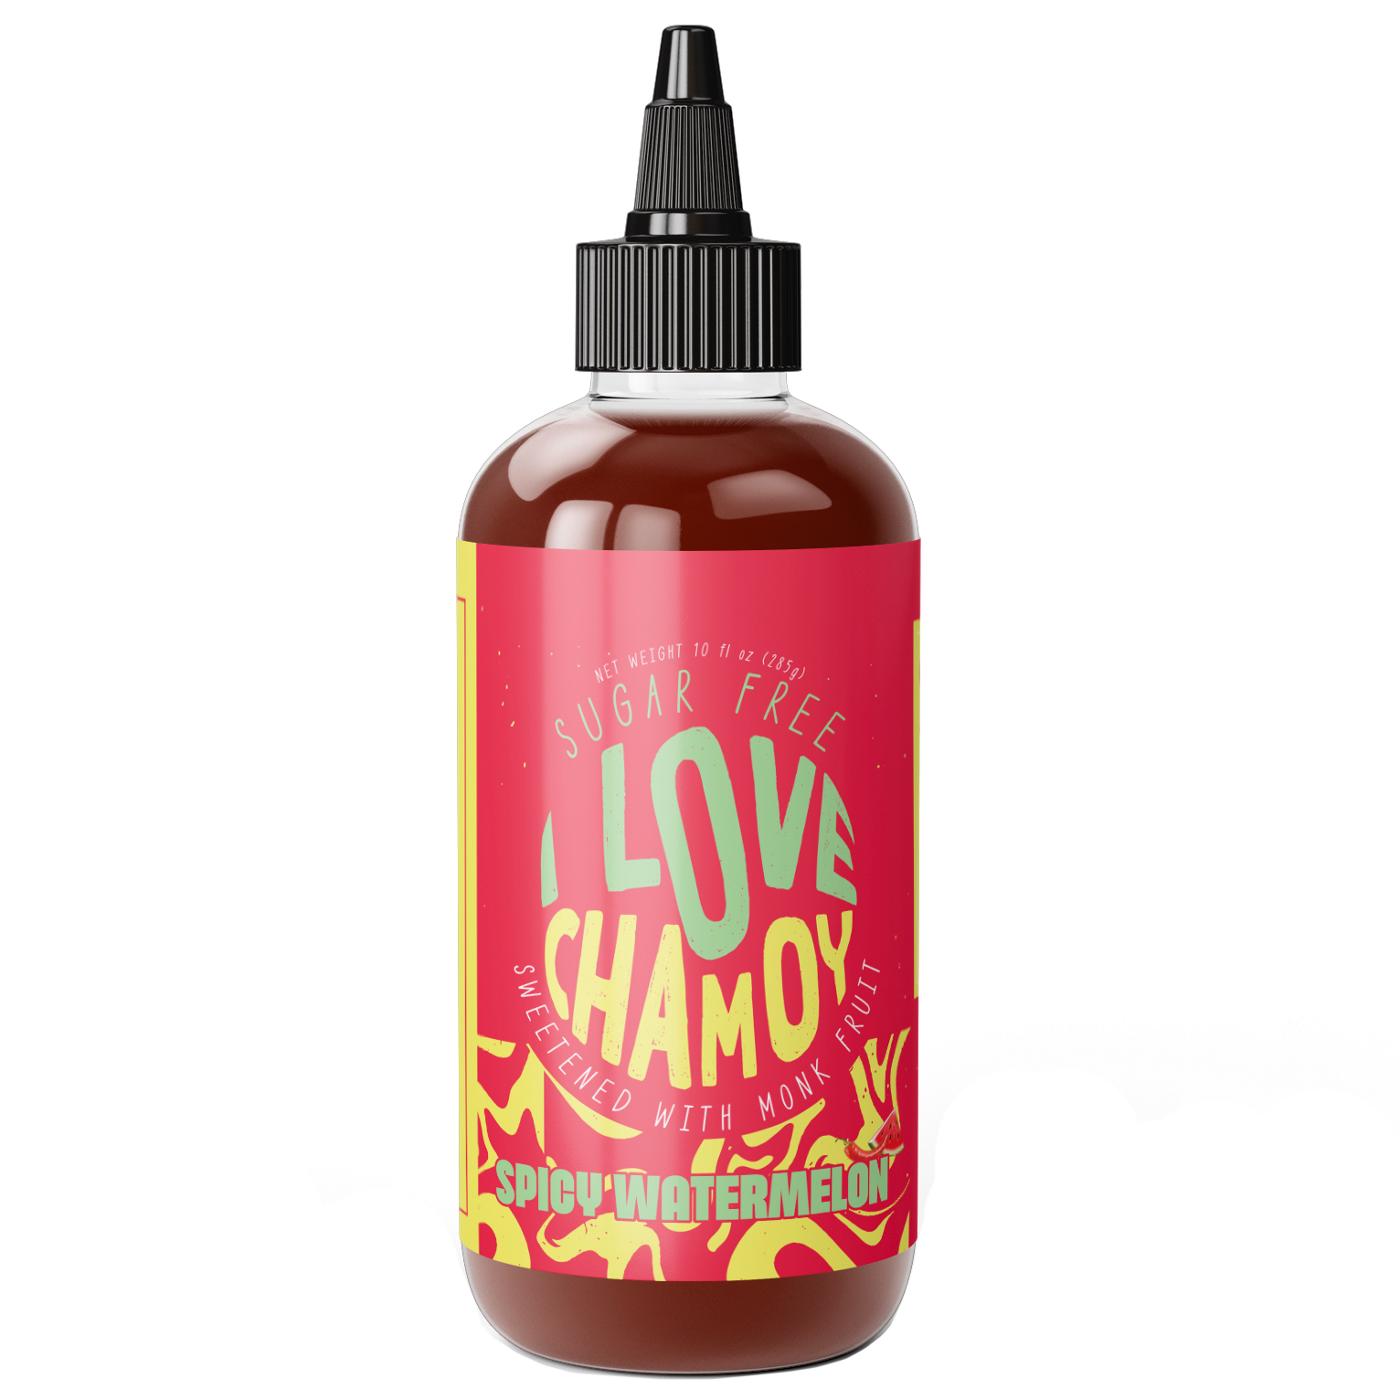 I Love Chamoy Sugar Free Spicy Watermelon Sauce; image 1 of 2